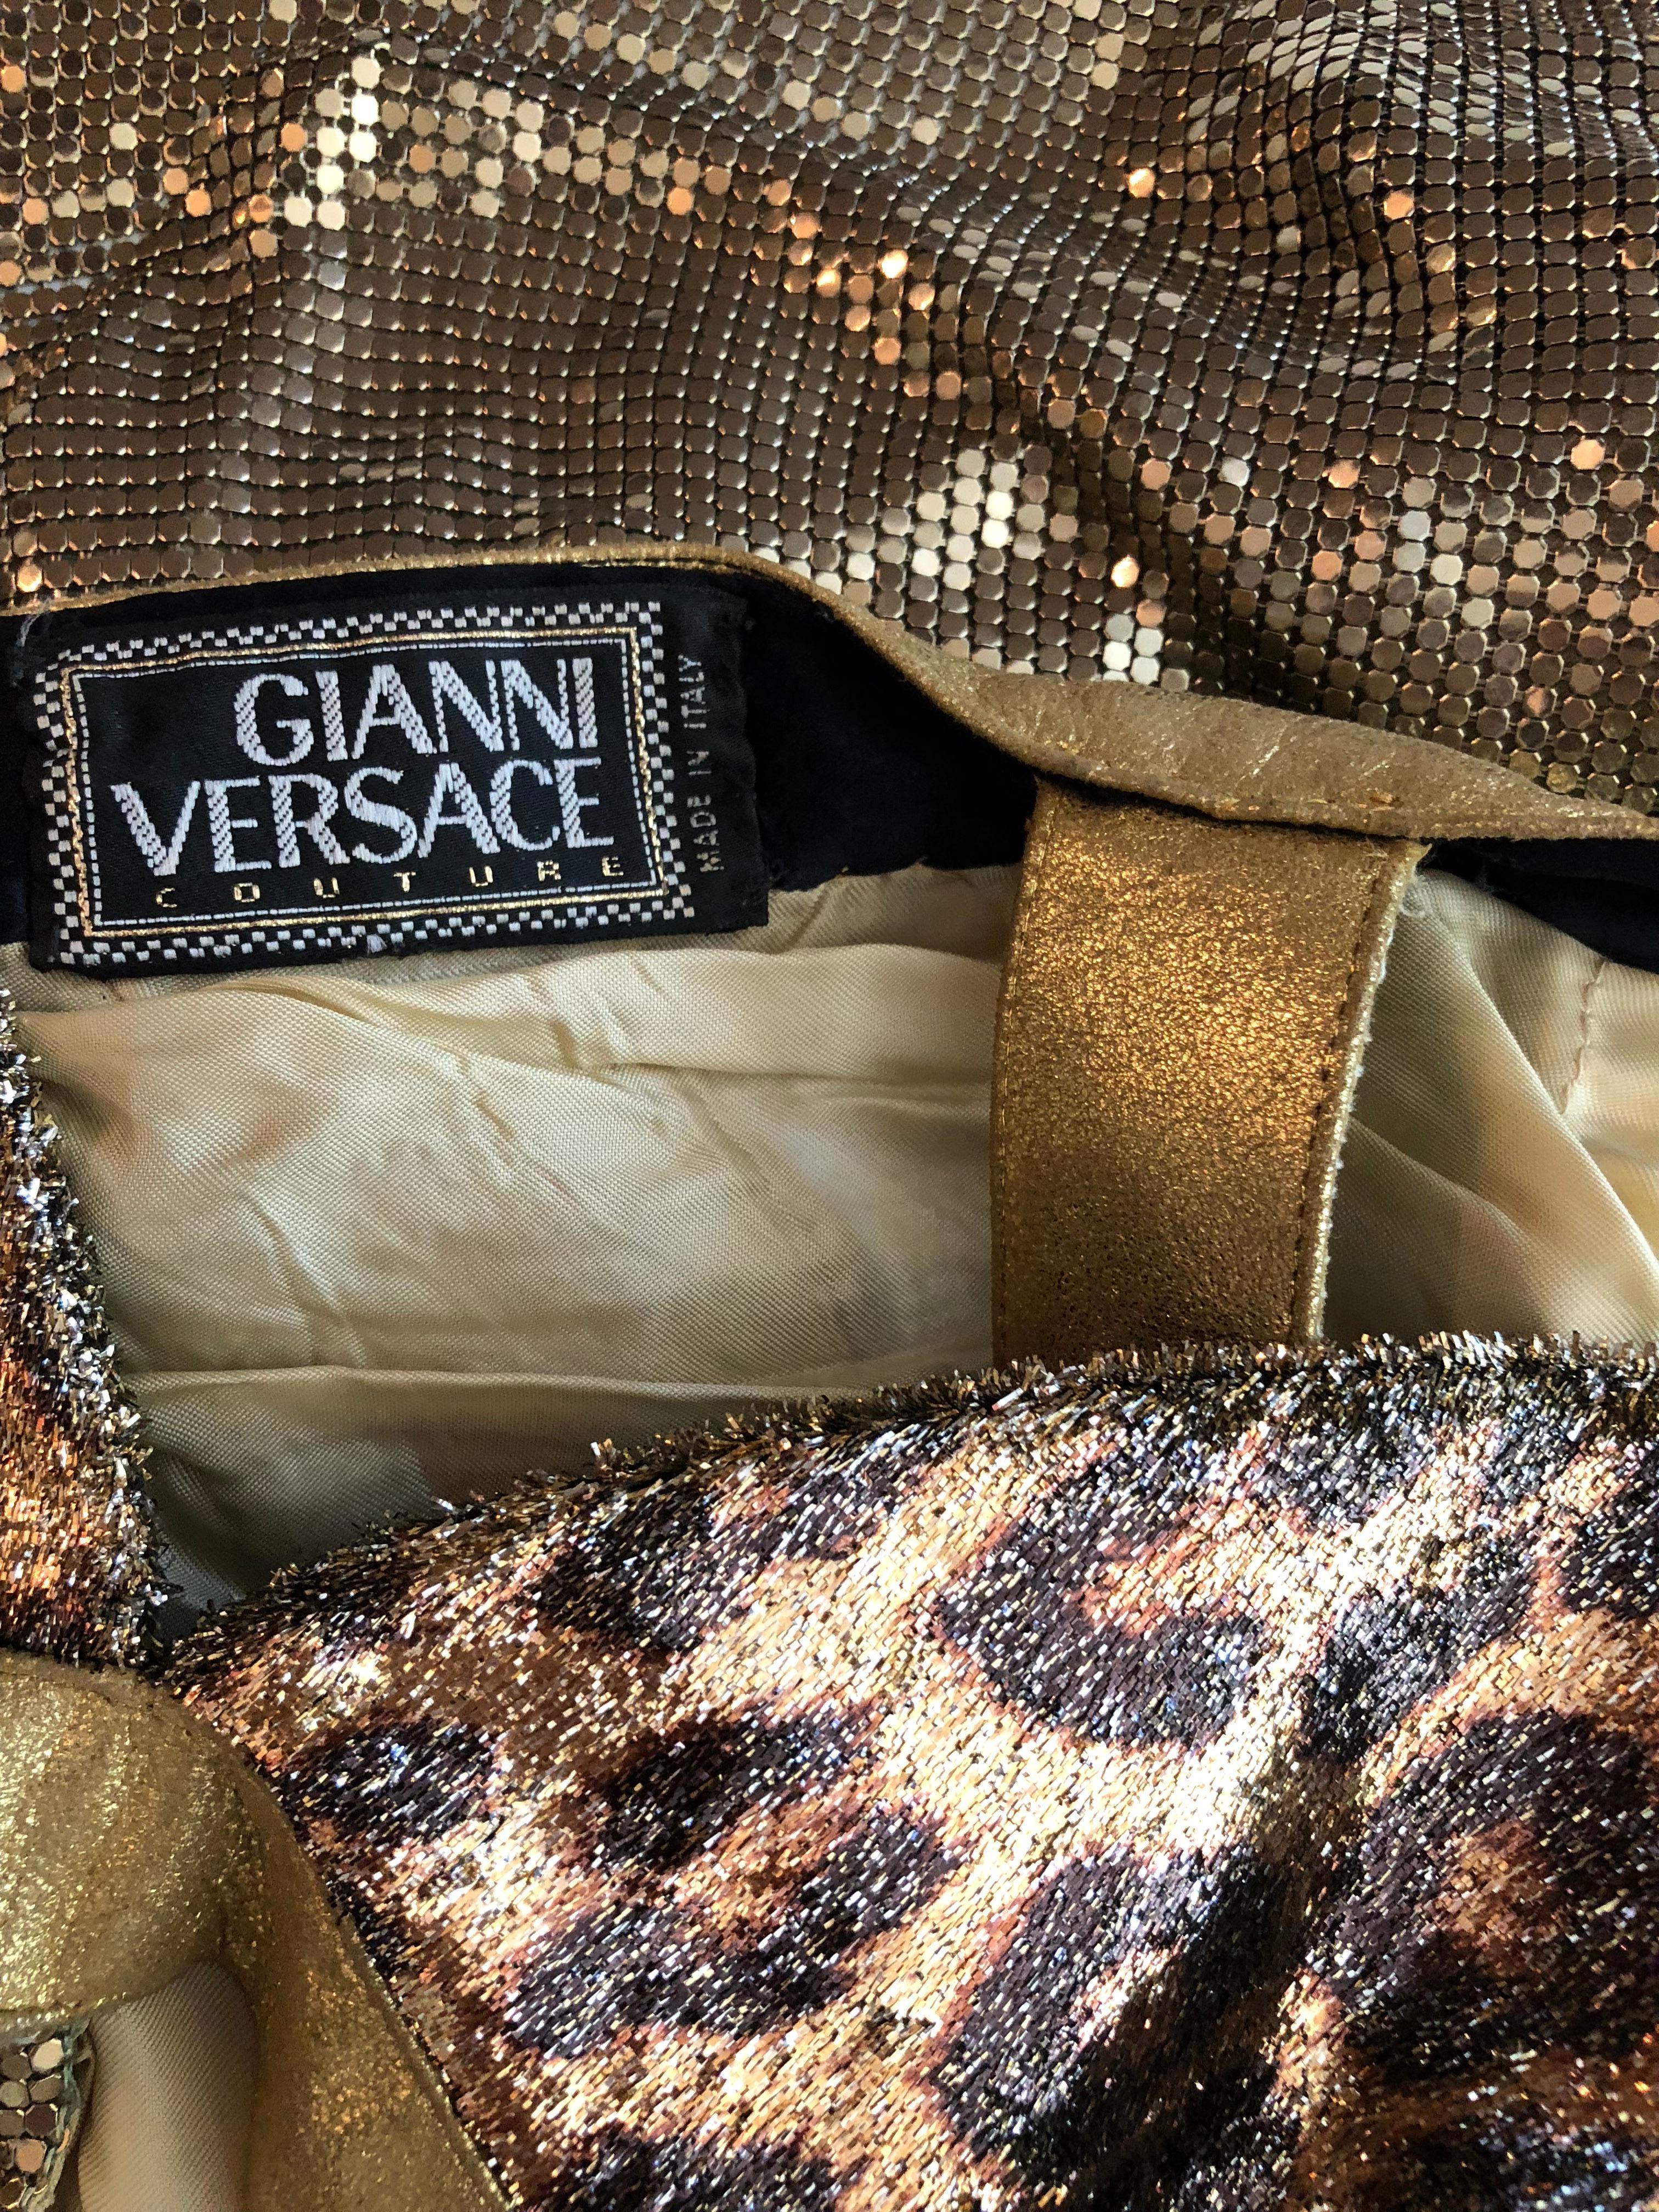 Gianni Versace F/W 1994 Runway Ad Campaign Vintage Gold Oroton Metal Mesh Dress In Good Condition For Sale In Naples, FL